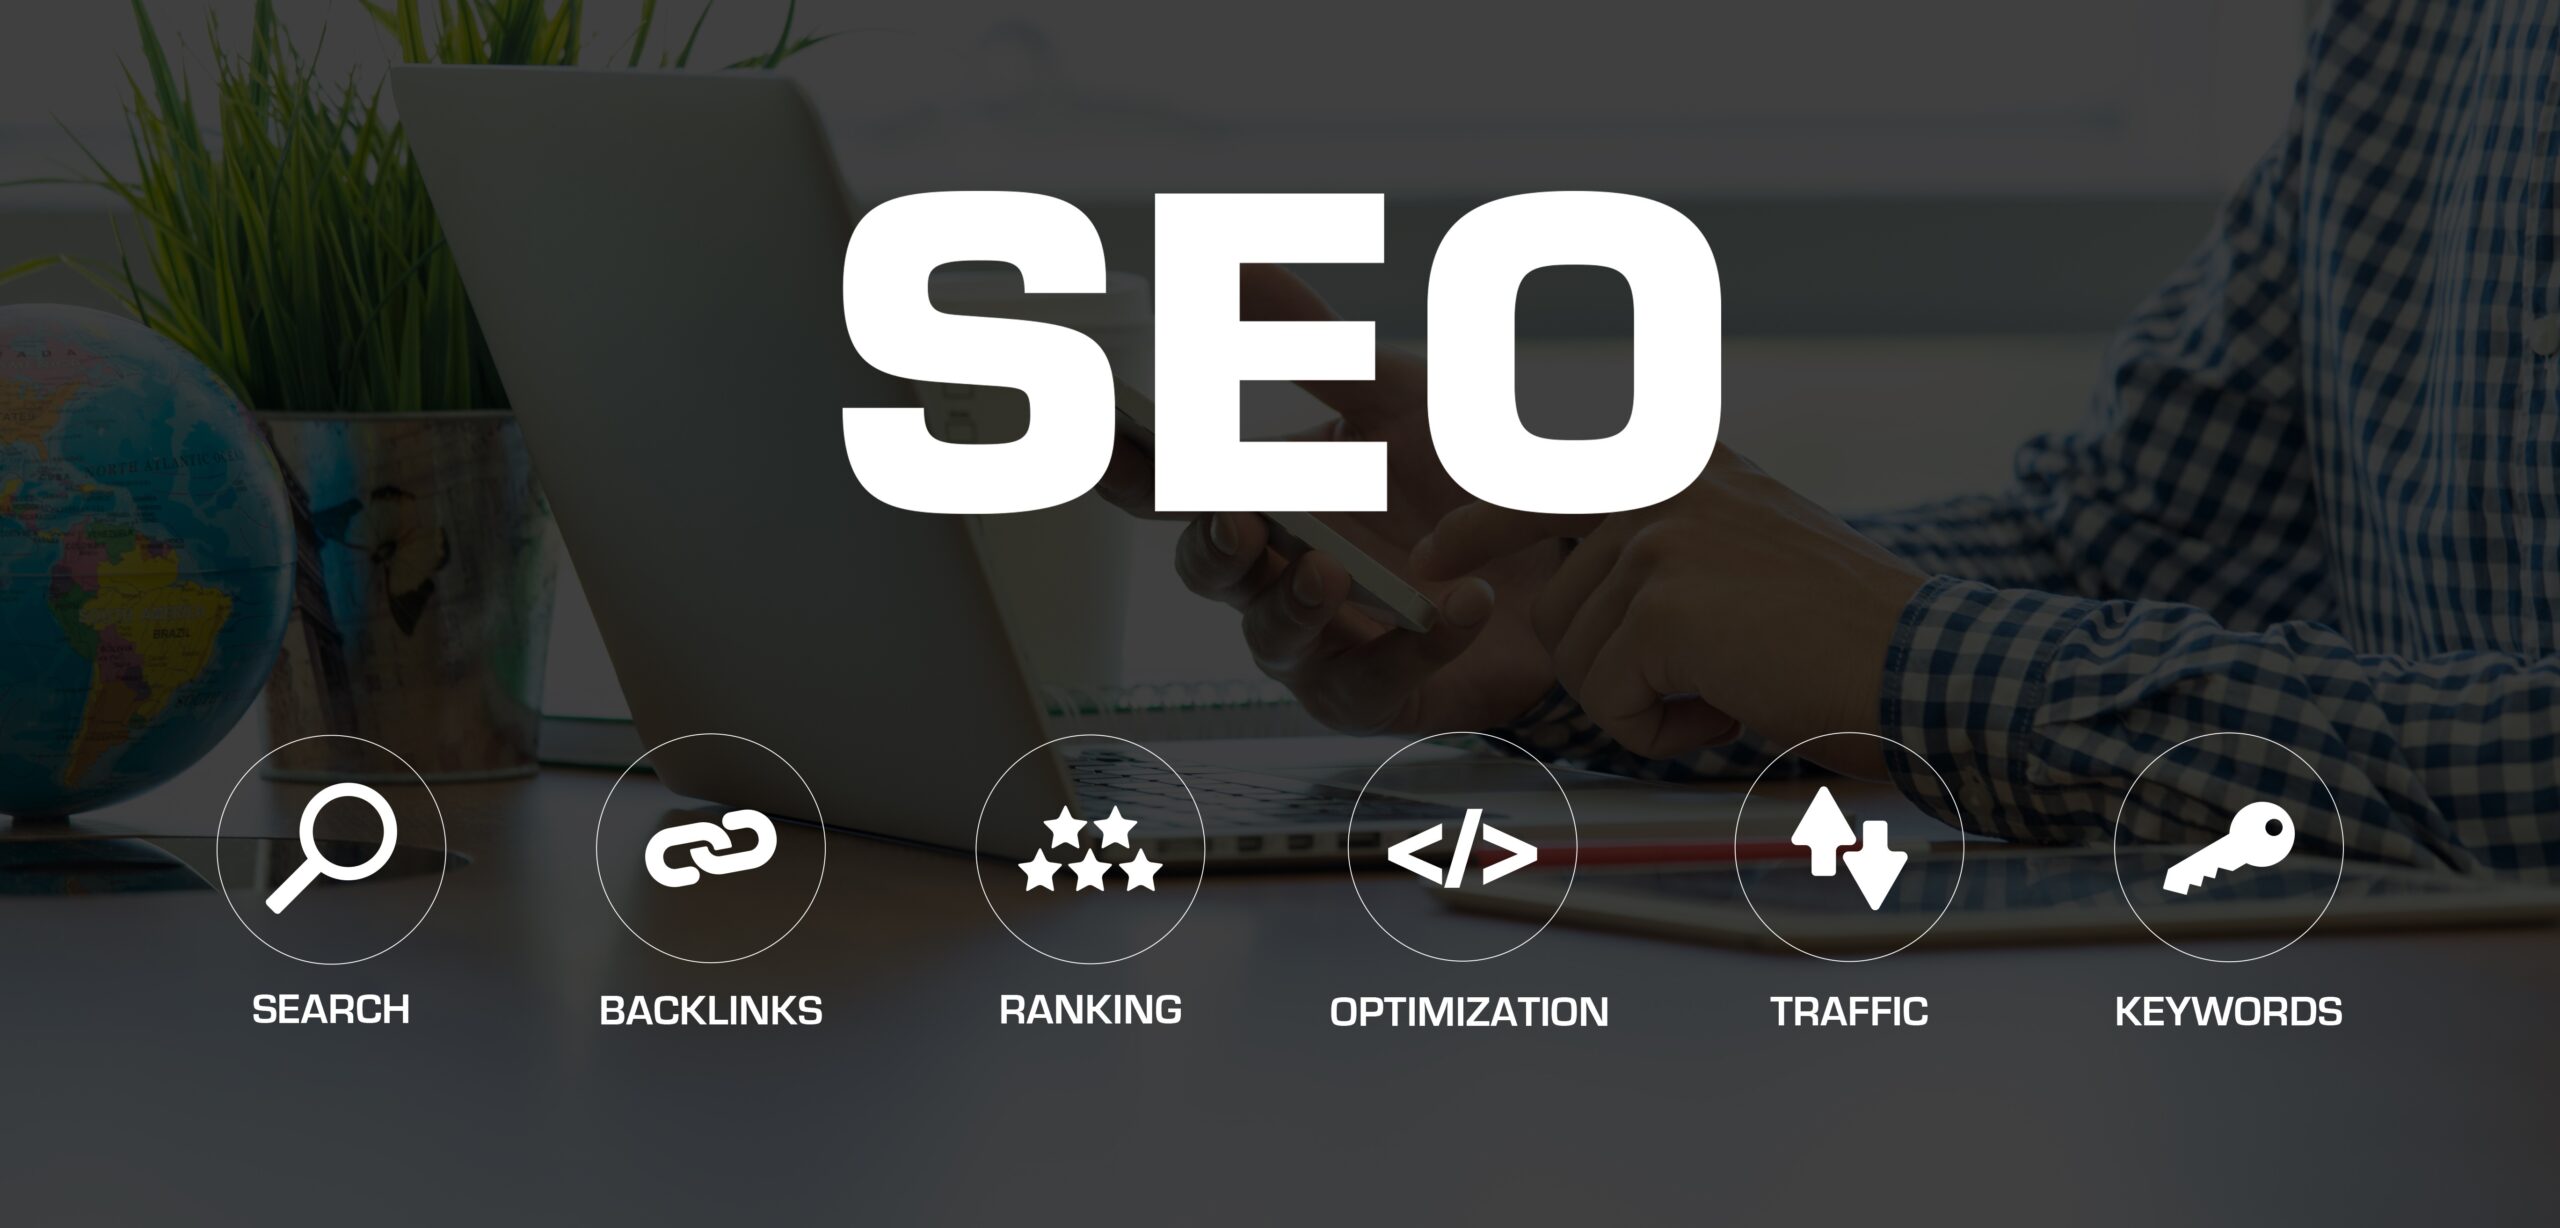 Buy Website SEO (Search Engine Optimization) Services